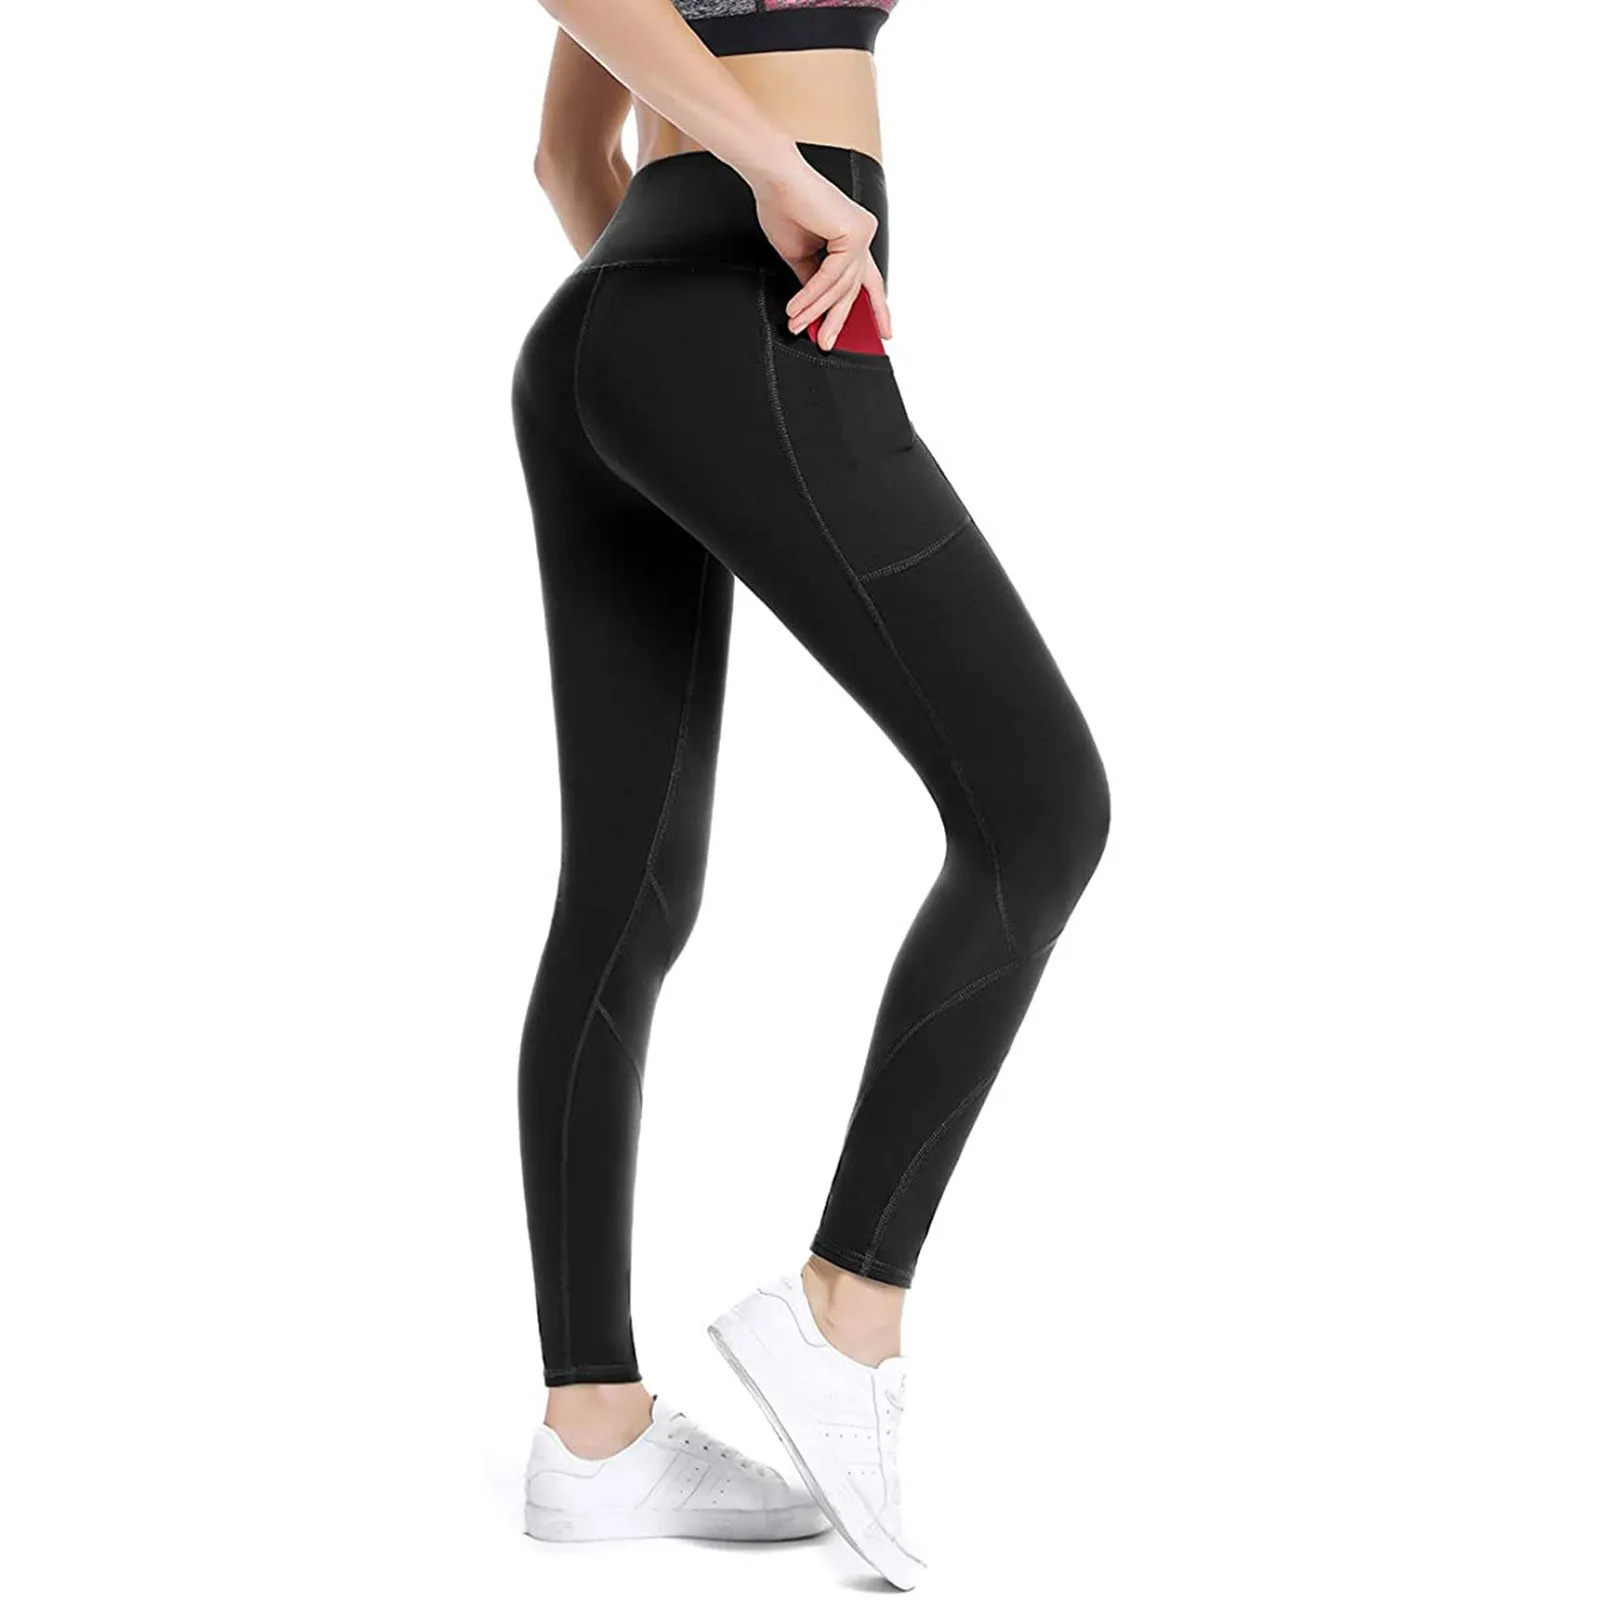 

Women High Waist Tummy Control Ruched Booty Pants Butt Lifting Yoga Leggings Elastic Workout Seamless Gym Compression Tights